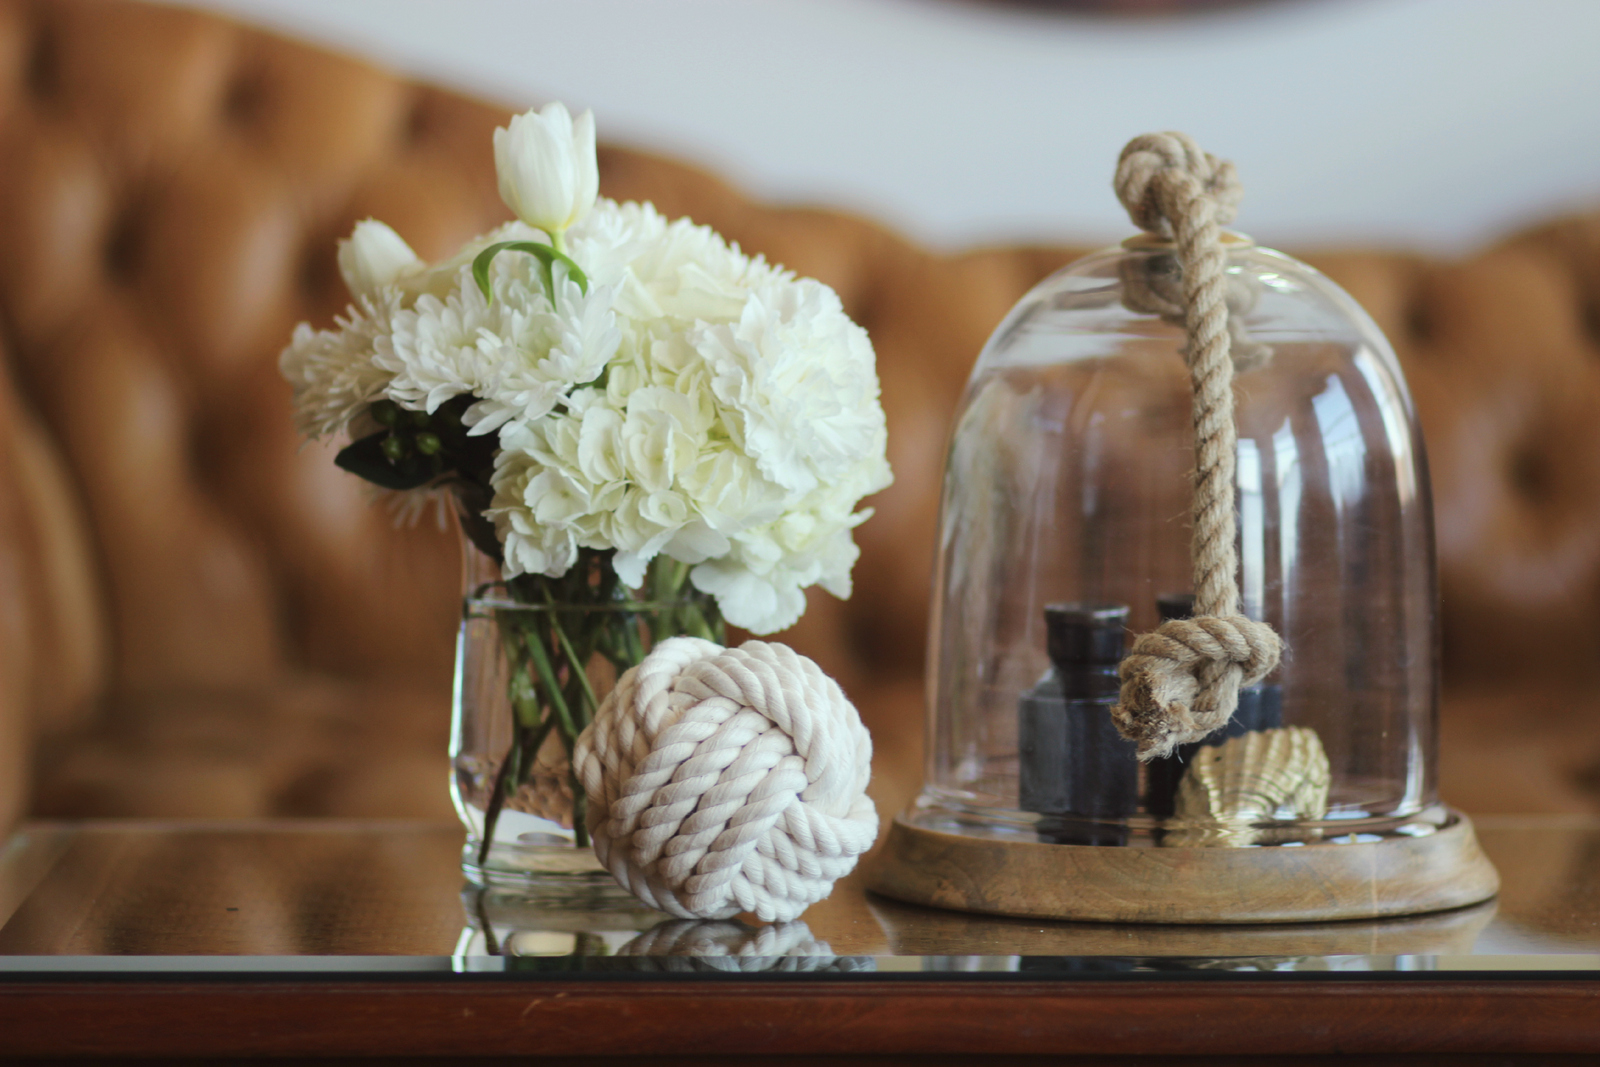 Grand Rapids Wedding Planner and Floral Designer - Nautical Preppy Style Photoshoot